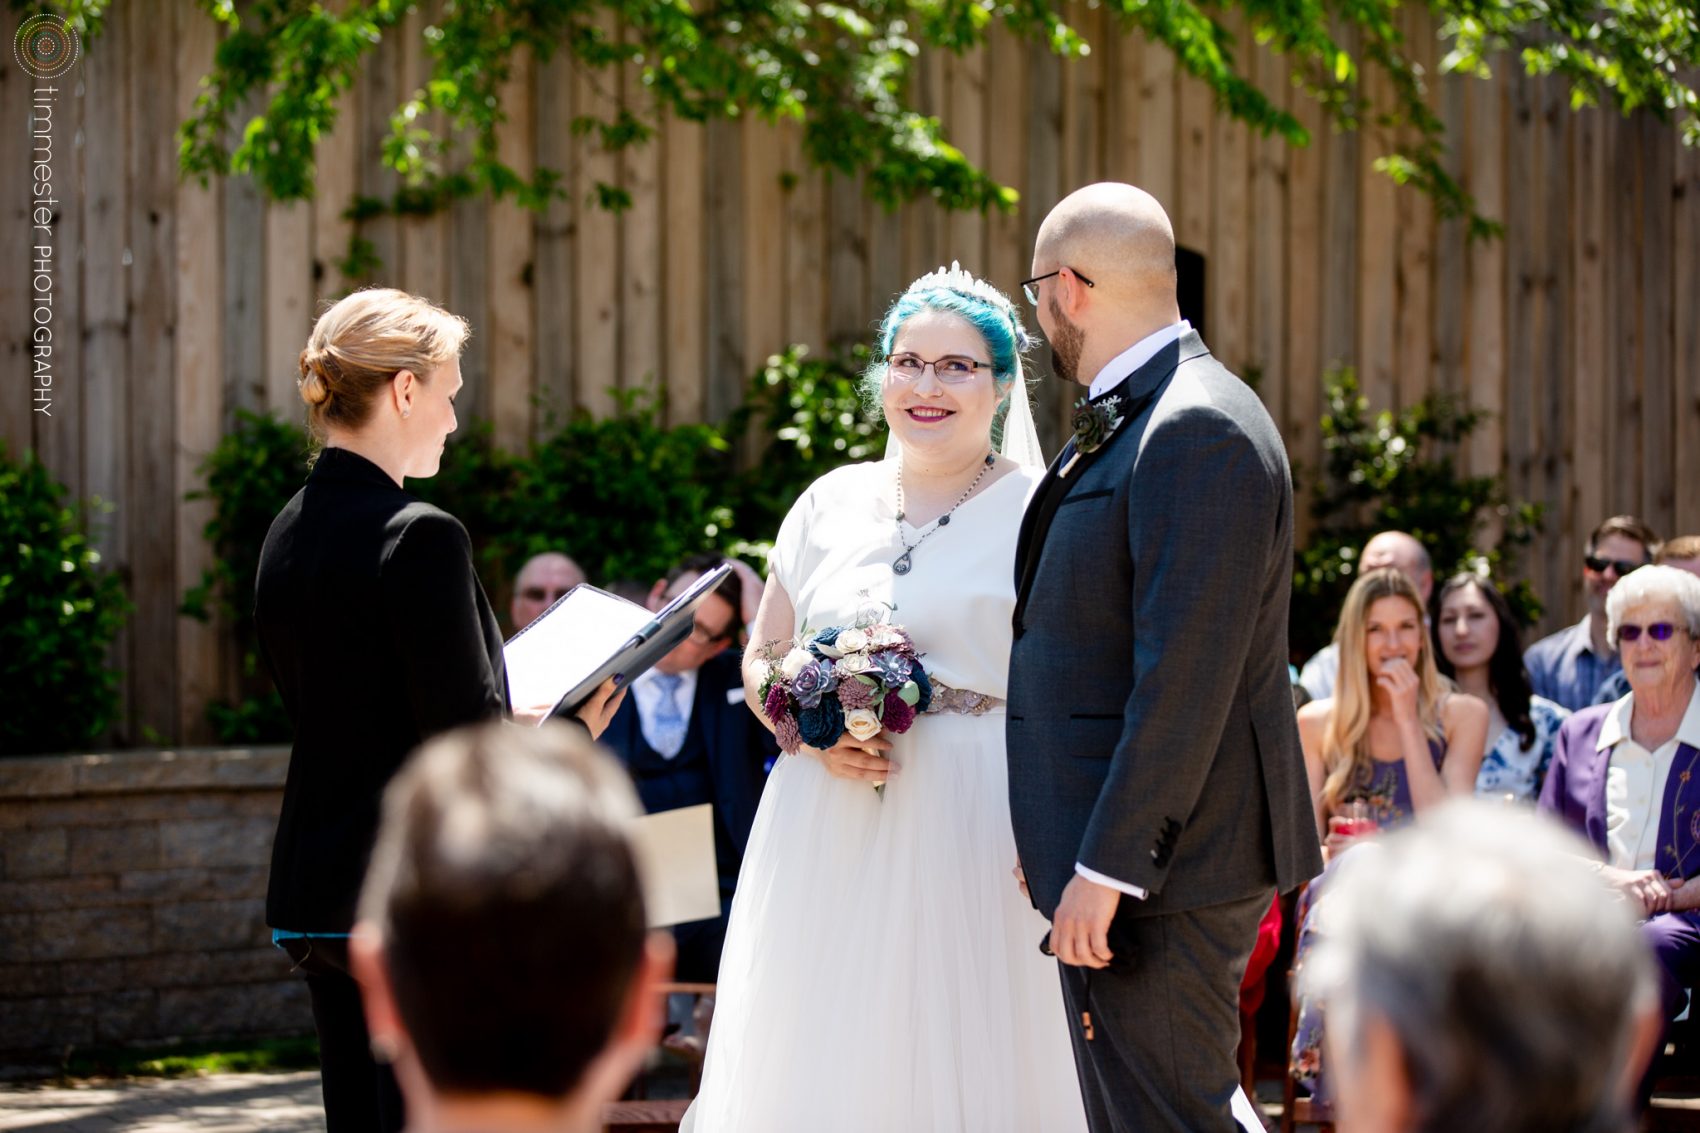 The Cookery hosts an unconventional, outdoor wedding ceremony in Durham, NC.